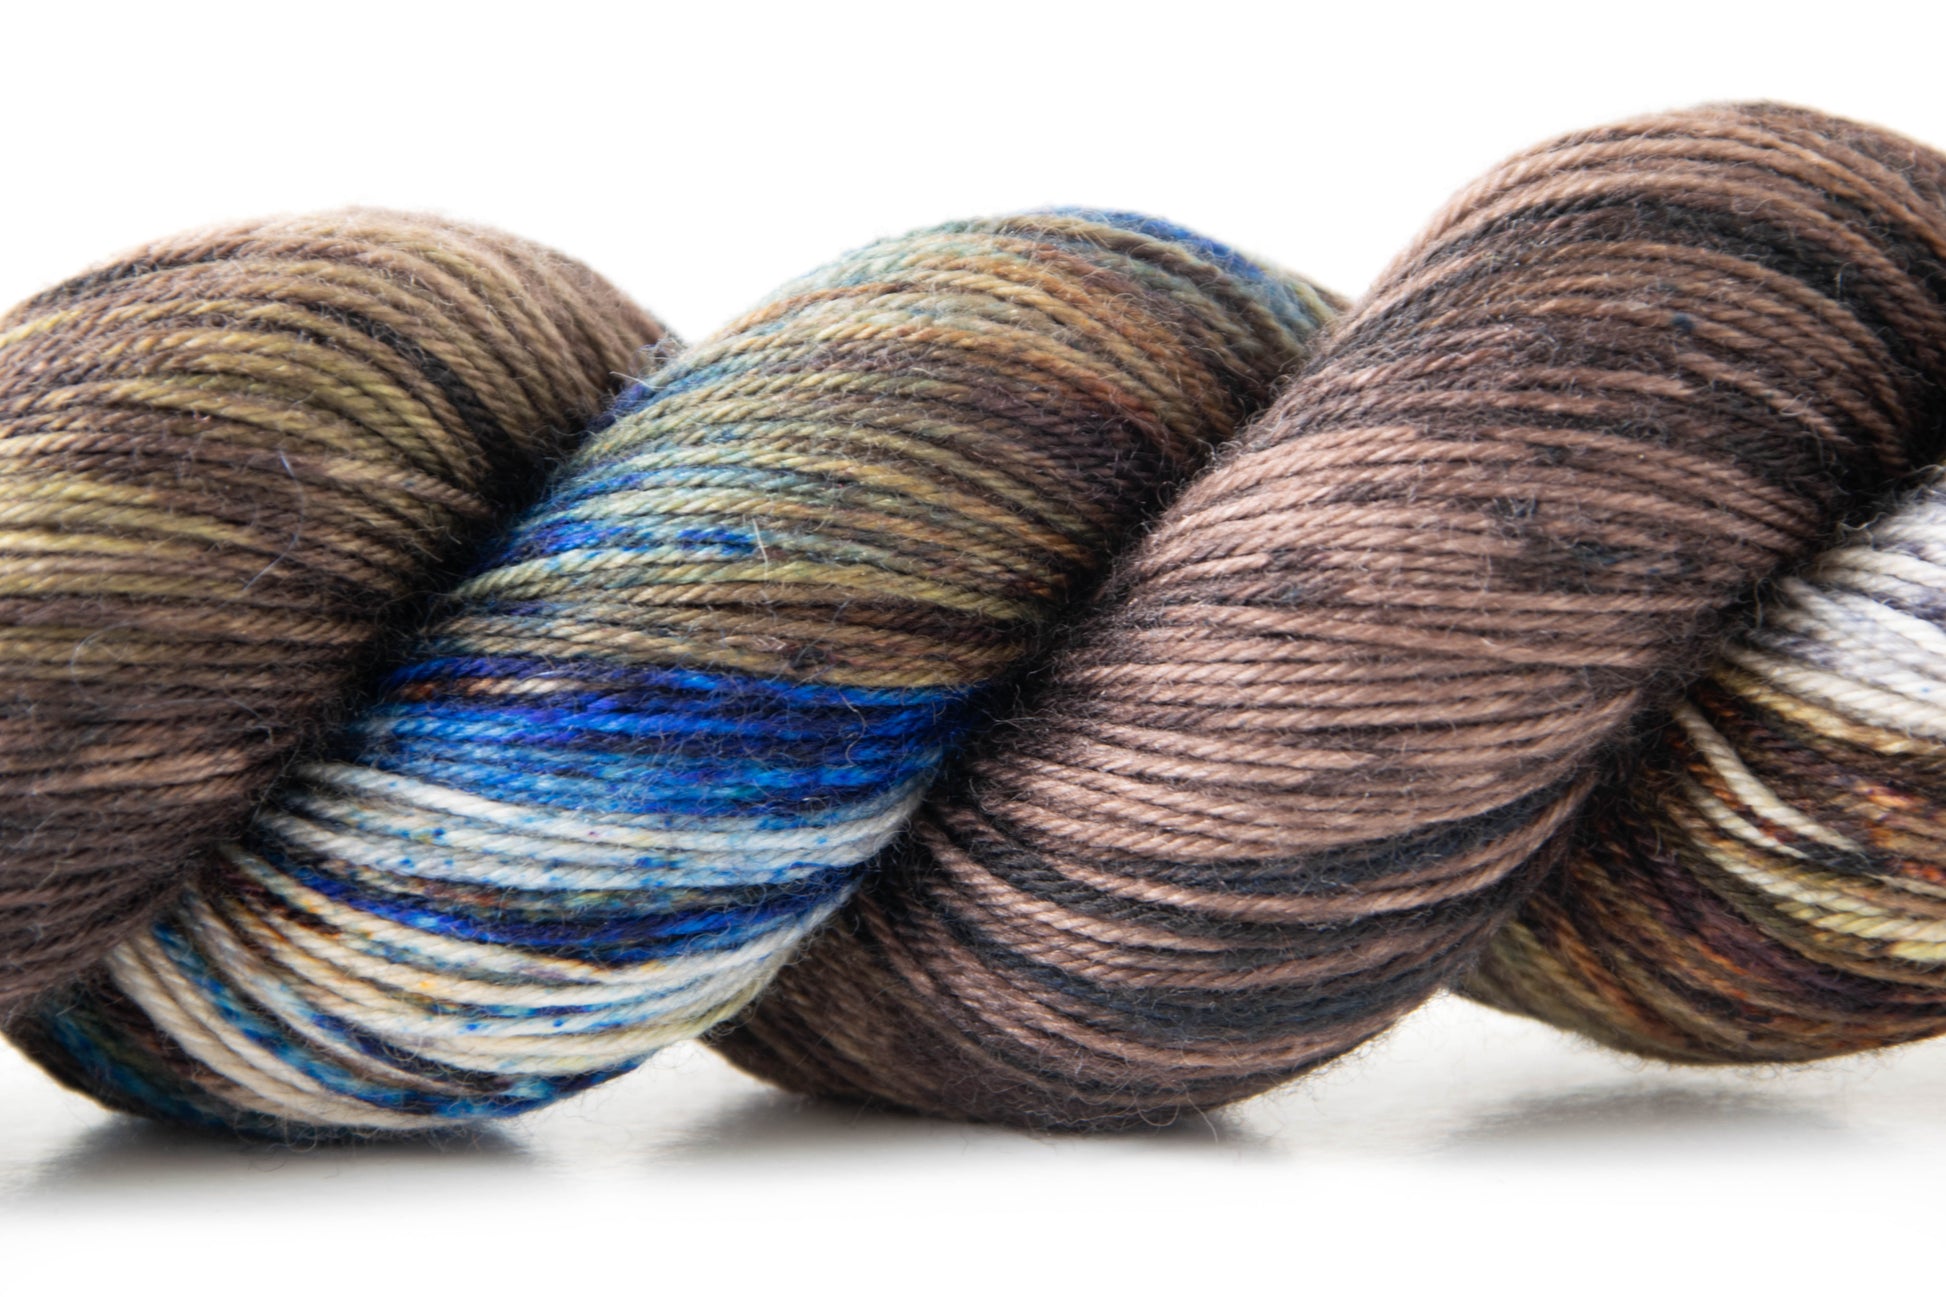 Close view of the variegation of the yarn, including large swaths of blue, a sandy brown background, and dark brown speckles.